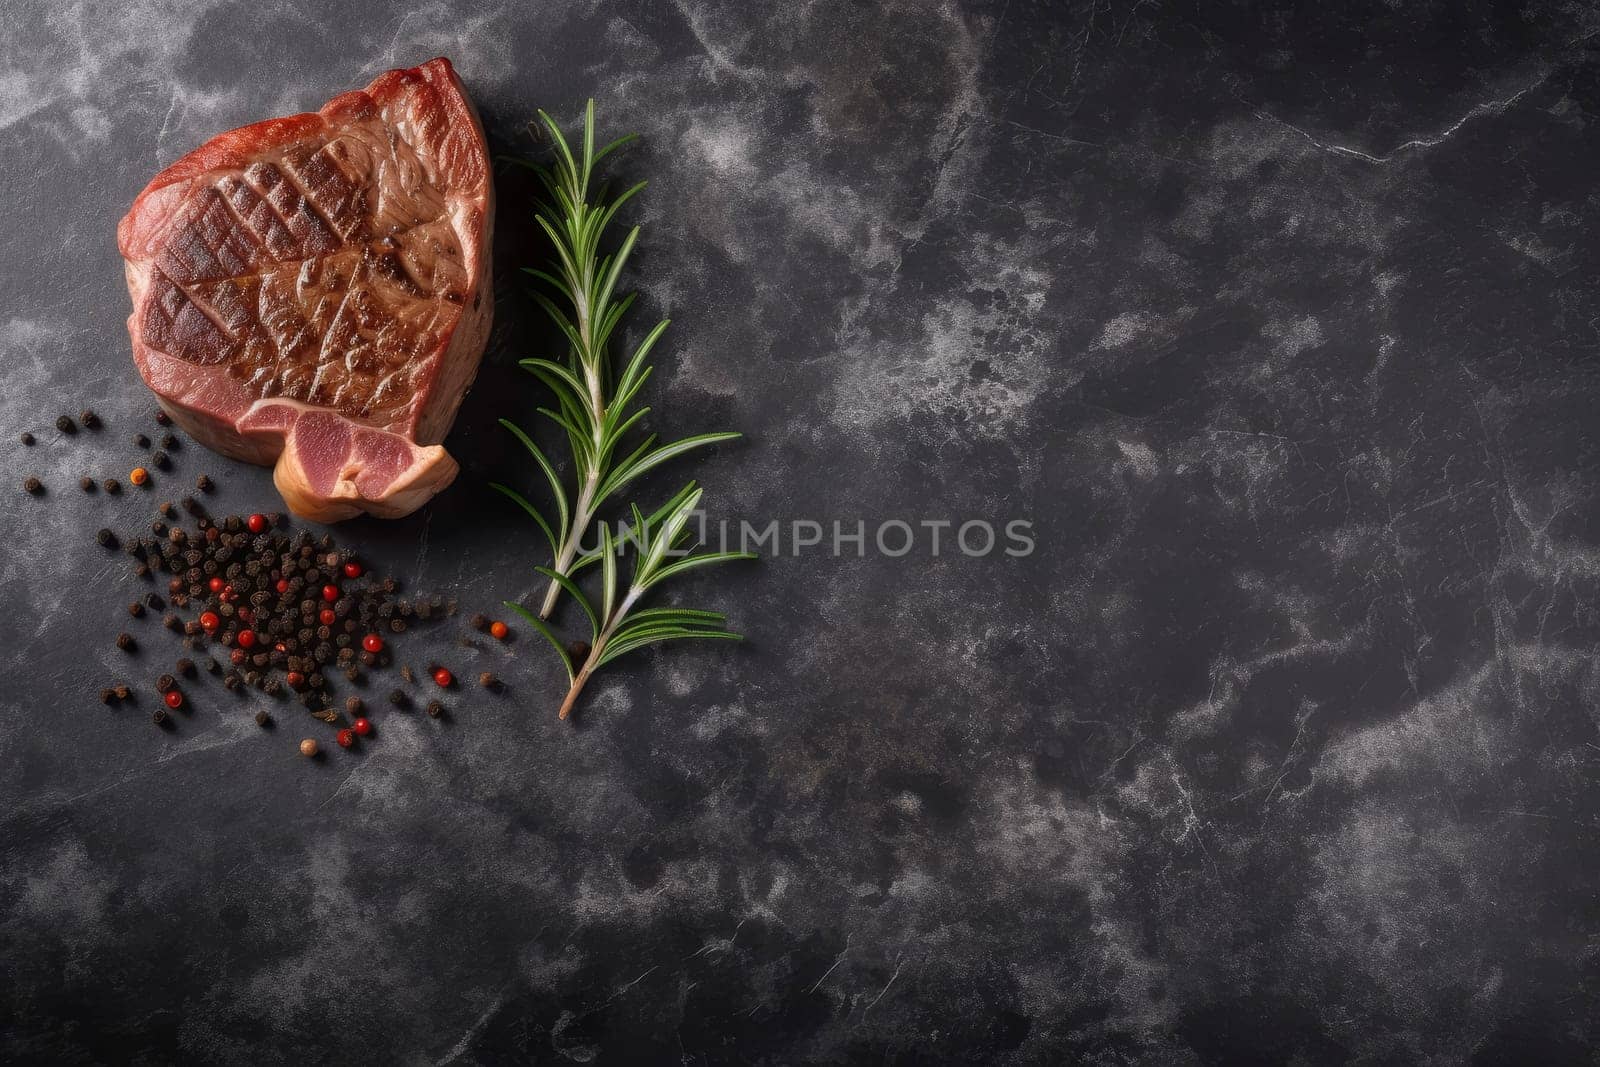 Raw steak with fresh rosemary and mixed peppercorns on dark marble background. Gourmet cooking and food preparation concept. High-quality ingredients photography with copy space